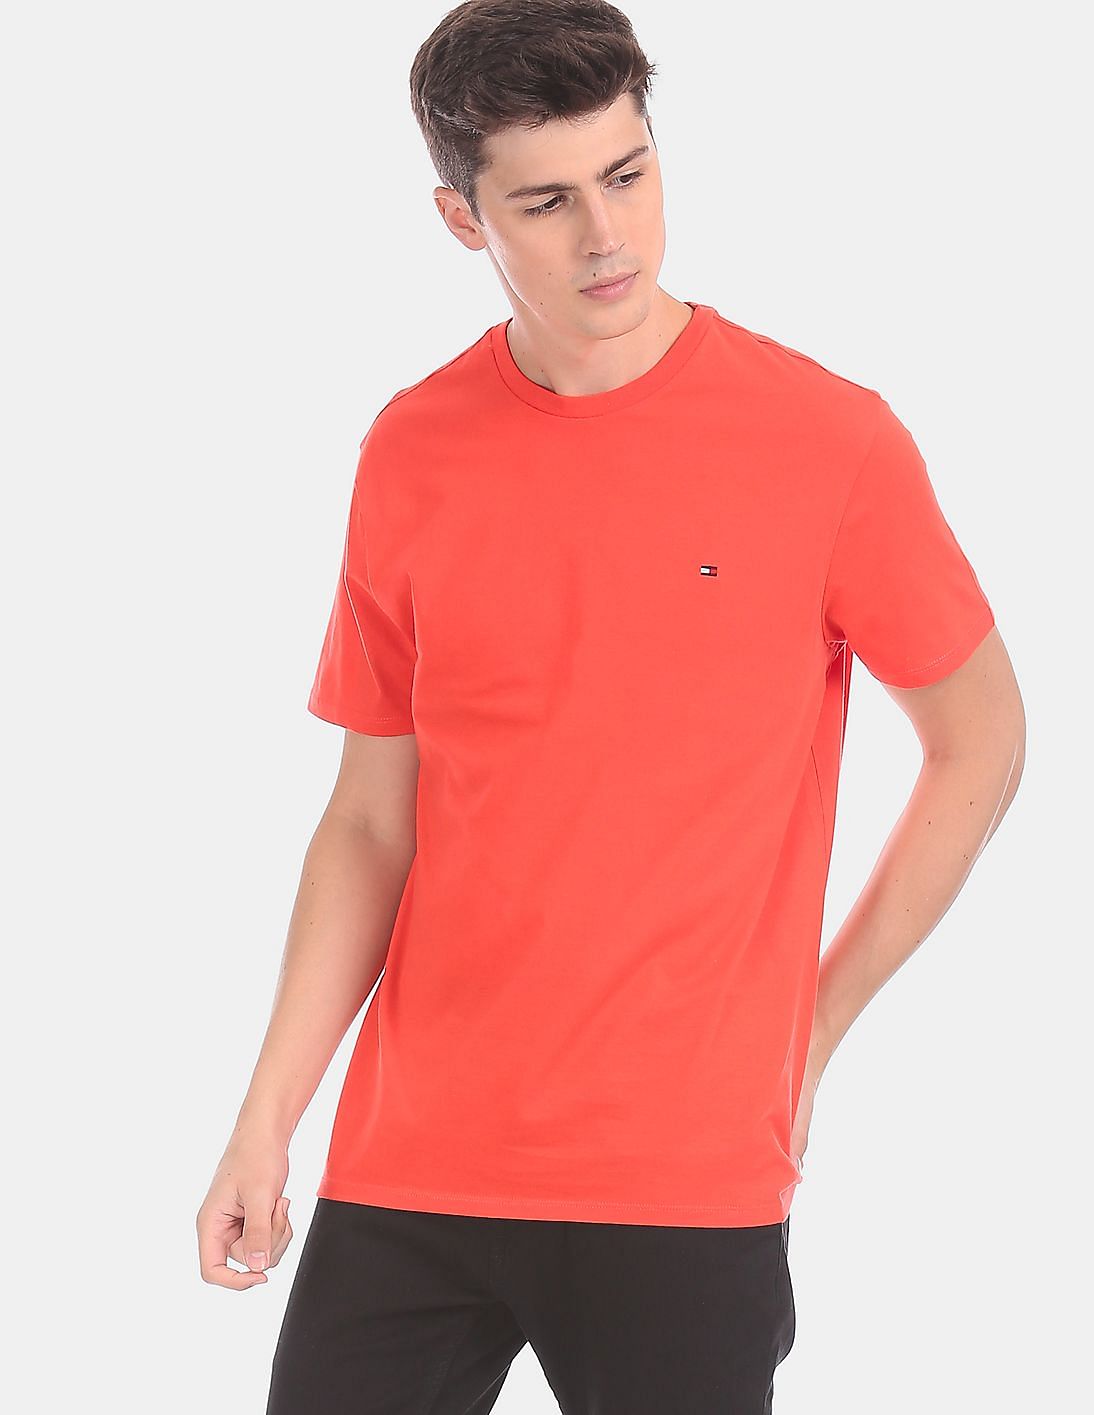 Buy Tommy Hilfiger Men Men Red Ribbed Crew Neck Solid T-Shirt - NNNOW.com